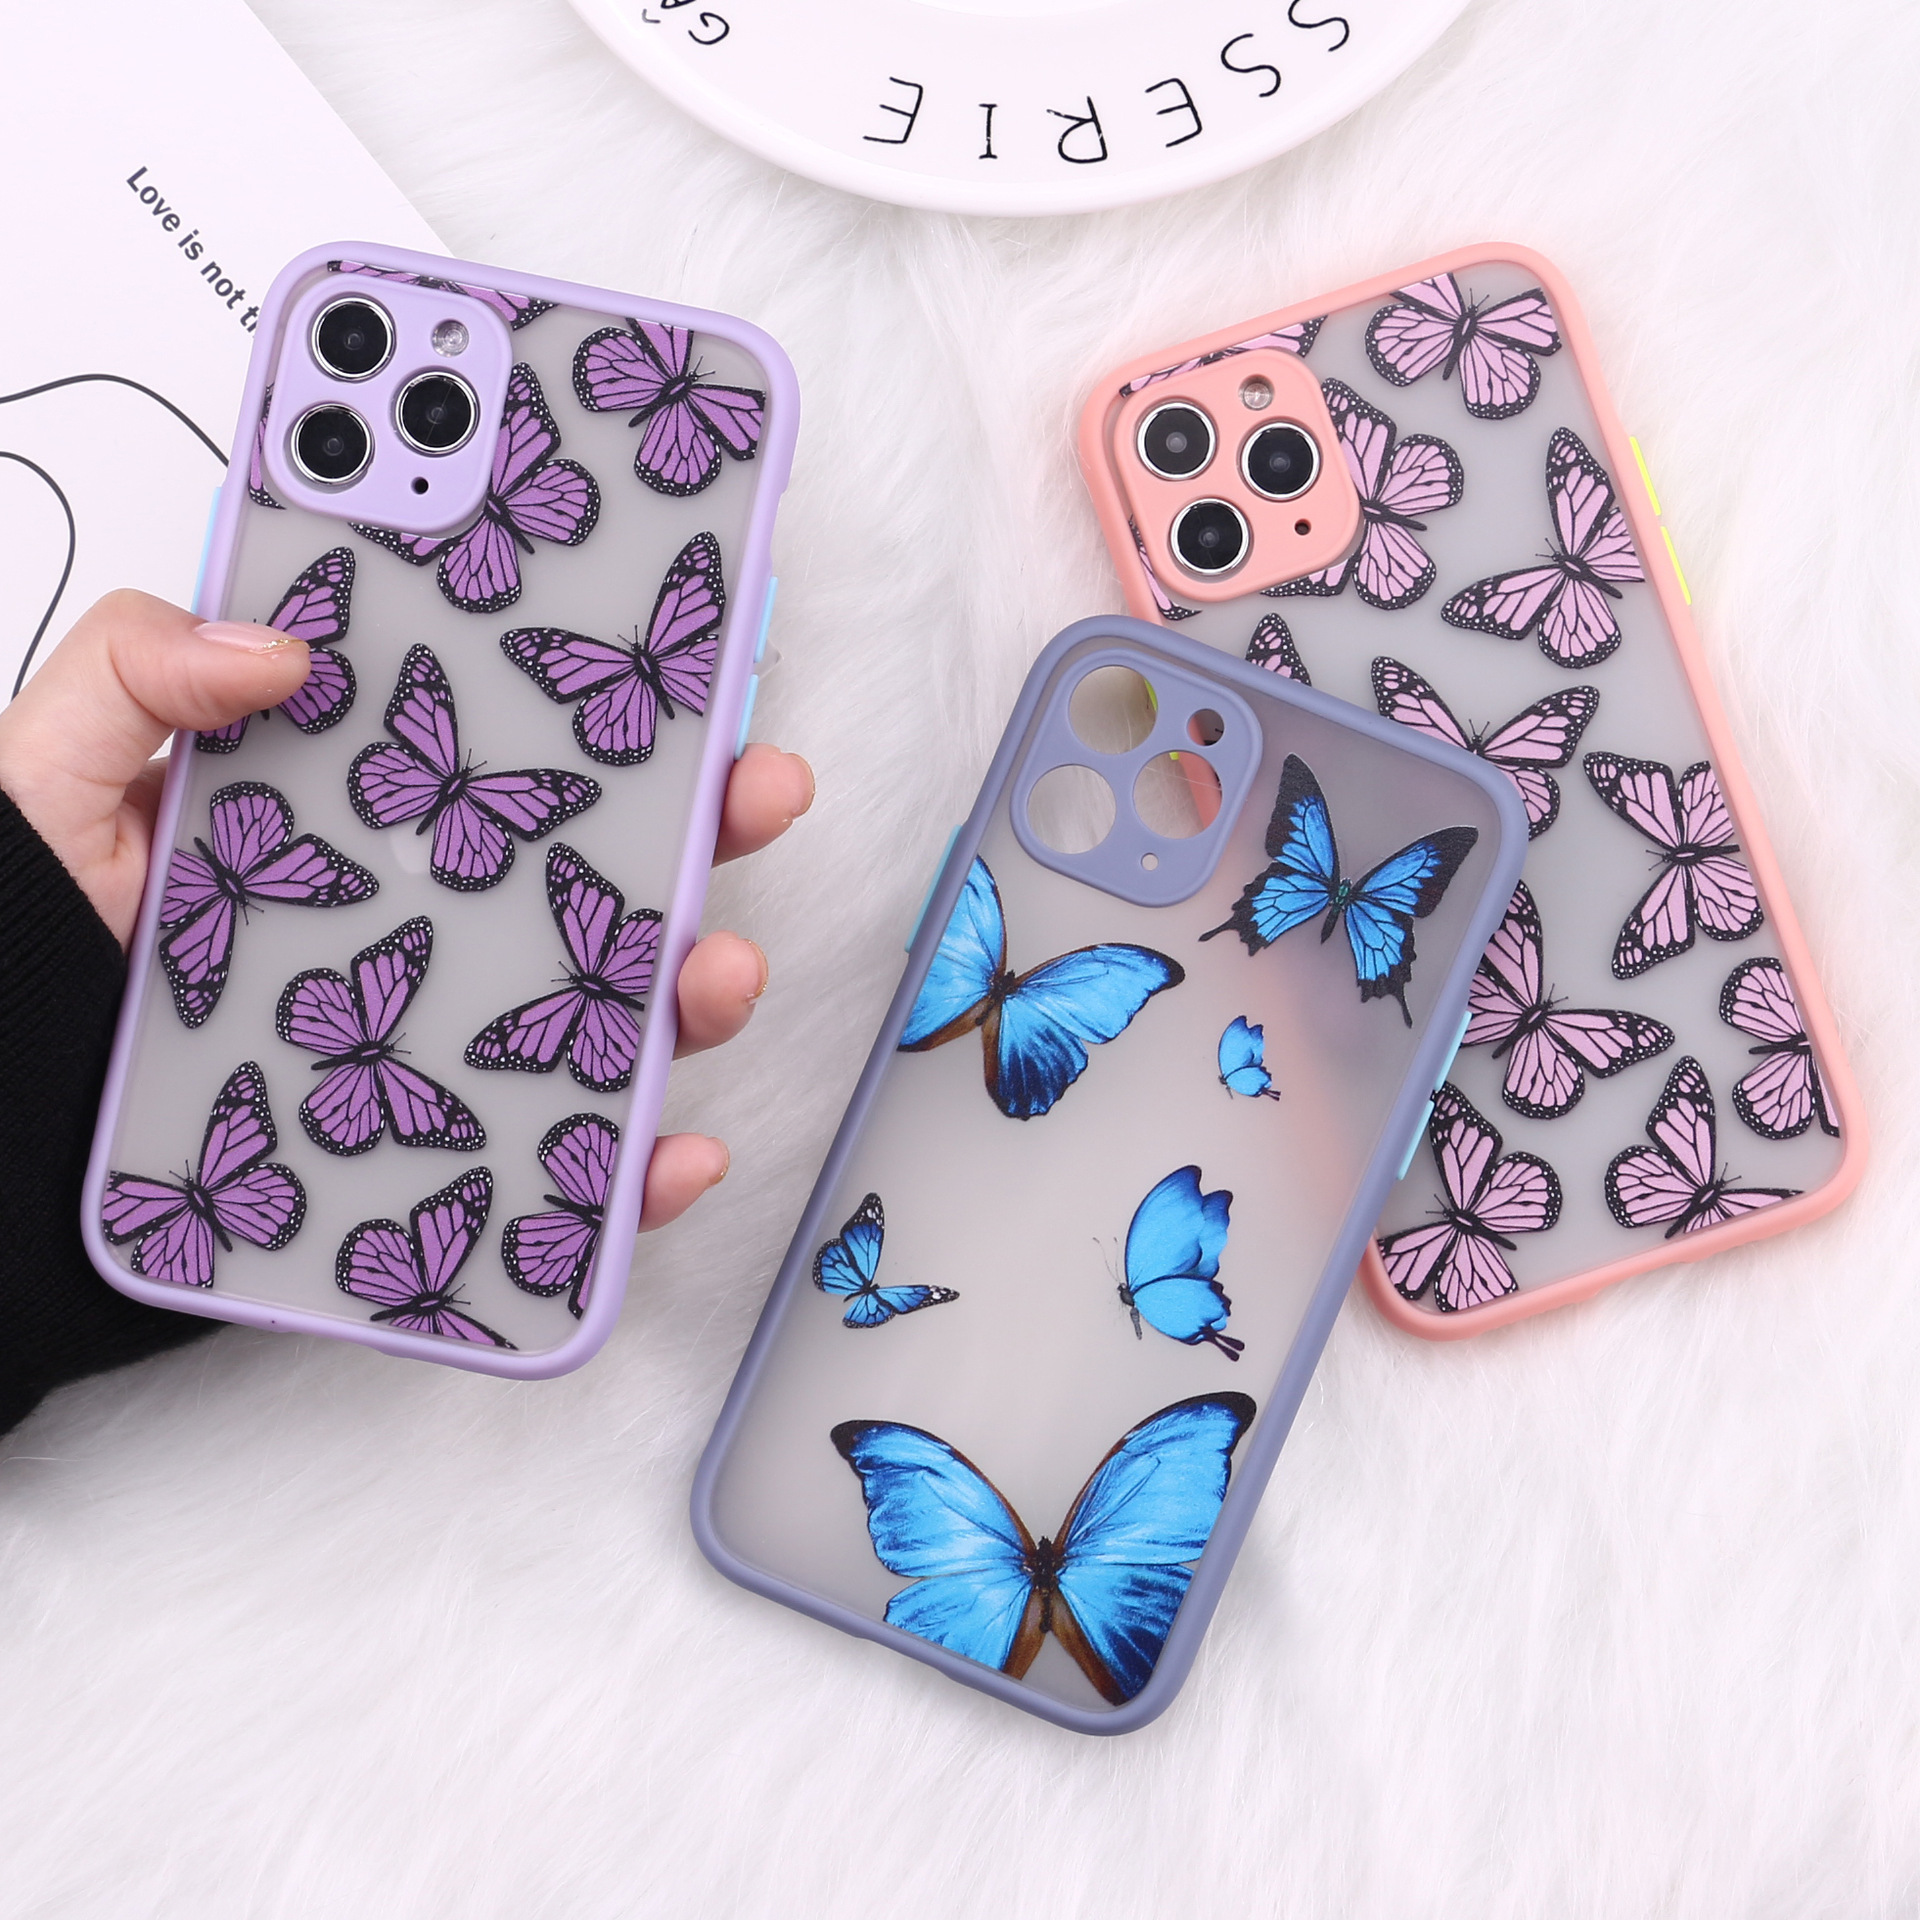 Butterfly Pattern iPhone Case (4 Designs)